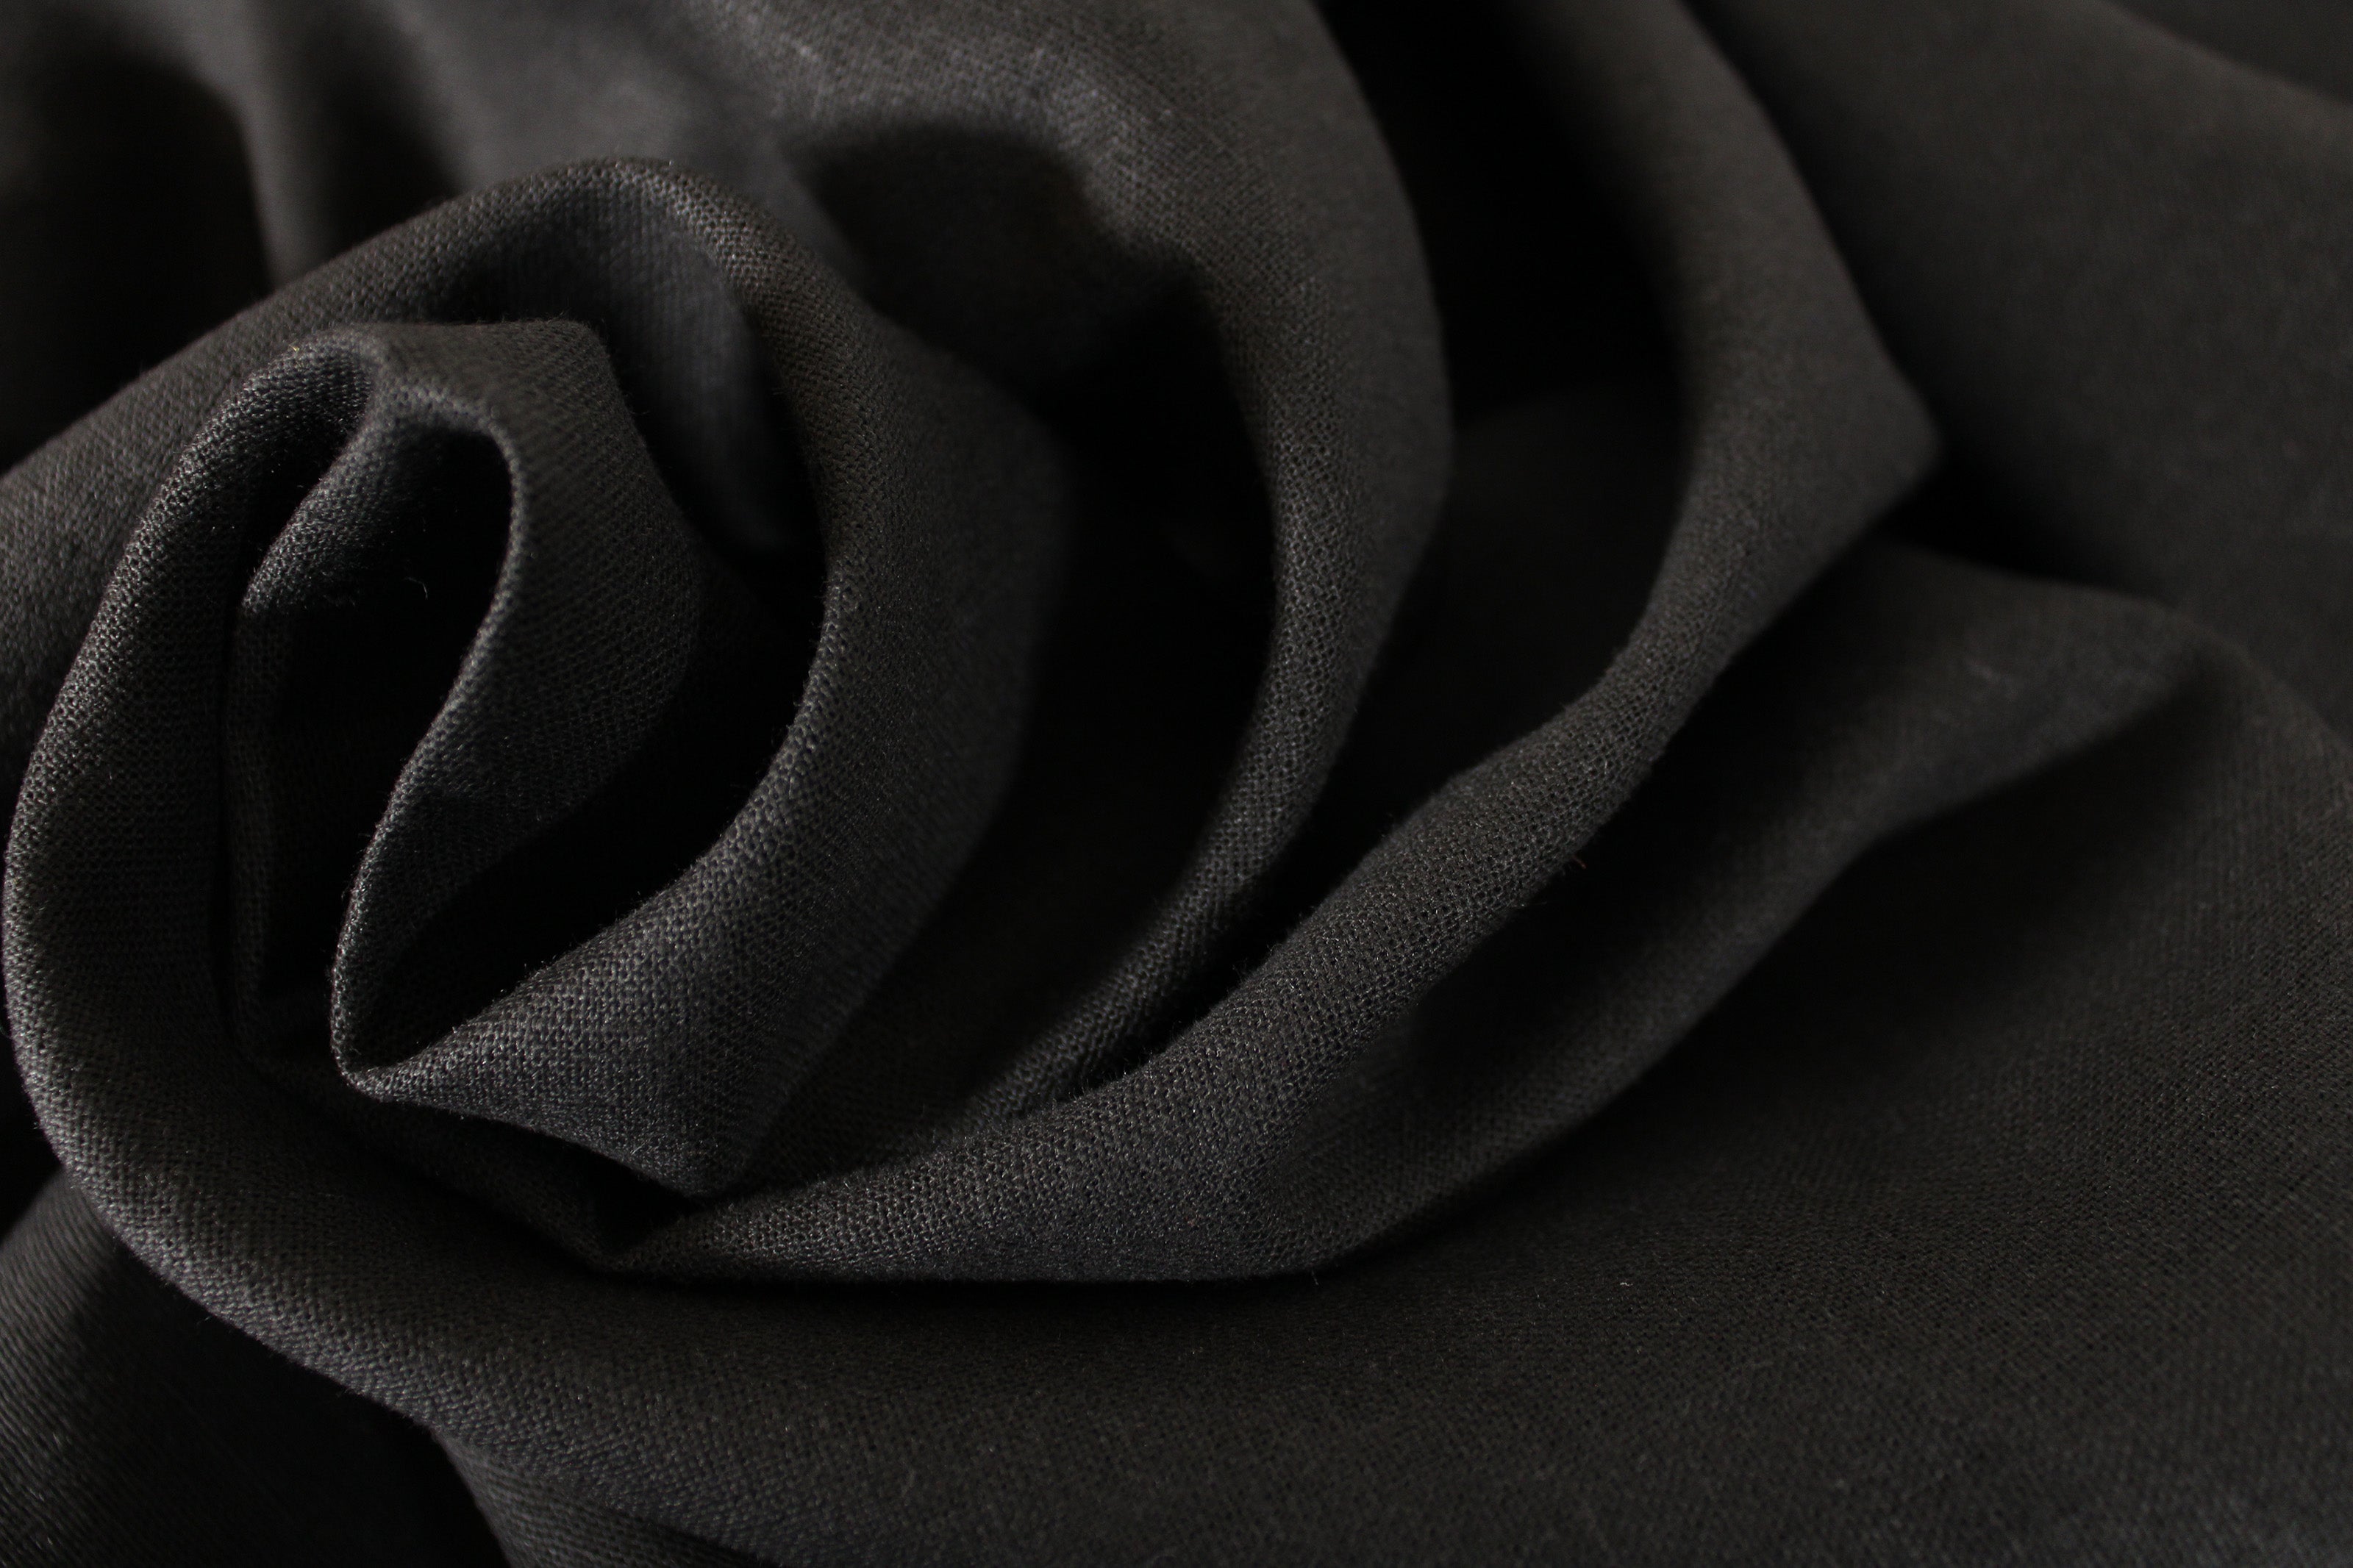 100% Linen Fabric by the Yard / Black Charcoal Linen Fabric / Buy Linen Online